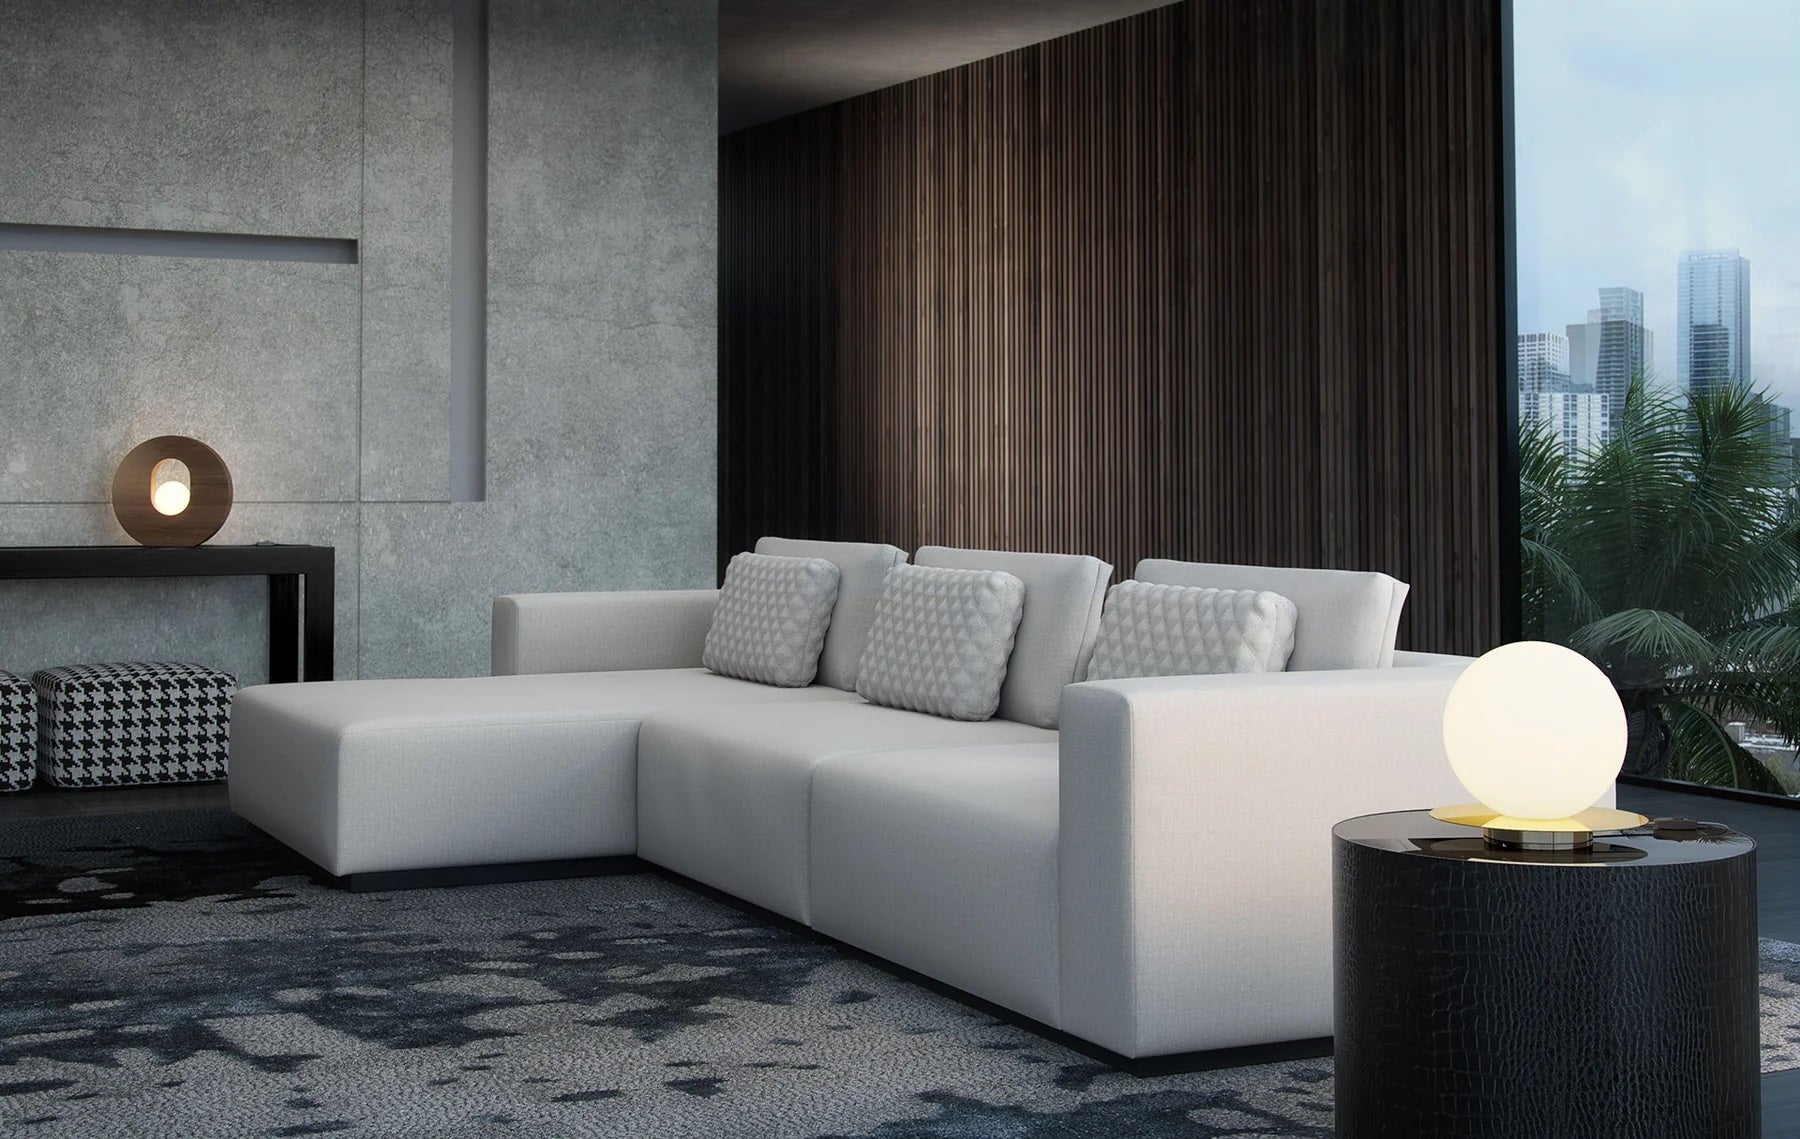 Modern living room with a white sectional sofa adorned with textured cushions, facing a round side table with a spherical lamp. The space features dark wooden paneling, a large window with a city view, and contemporary decor including a sleek console table and patterned objects.